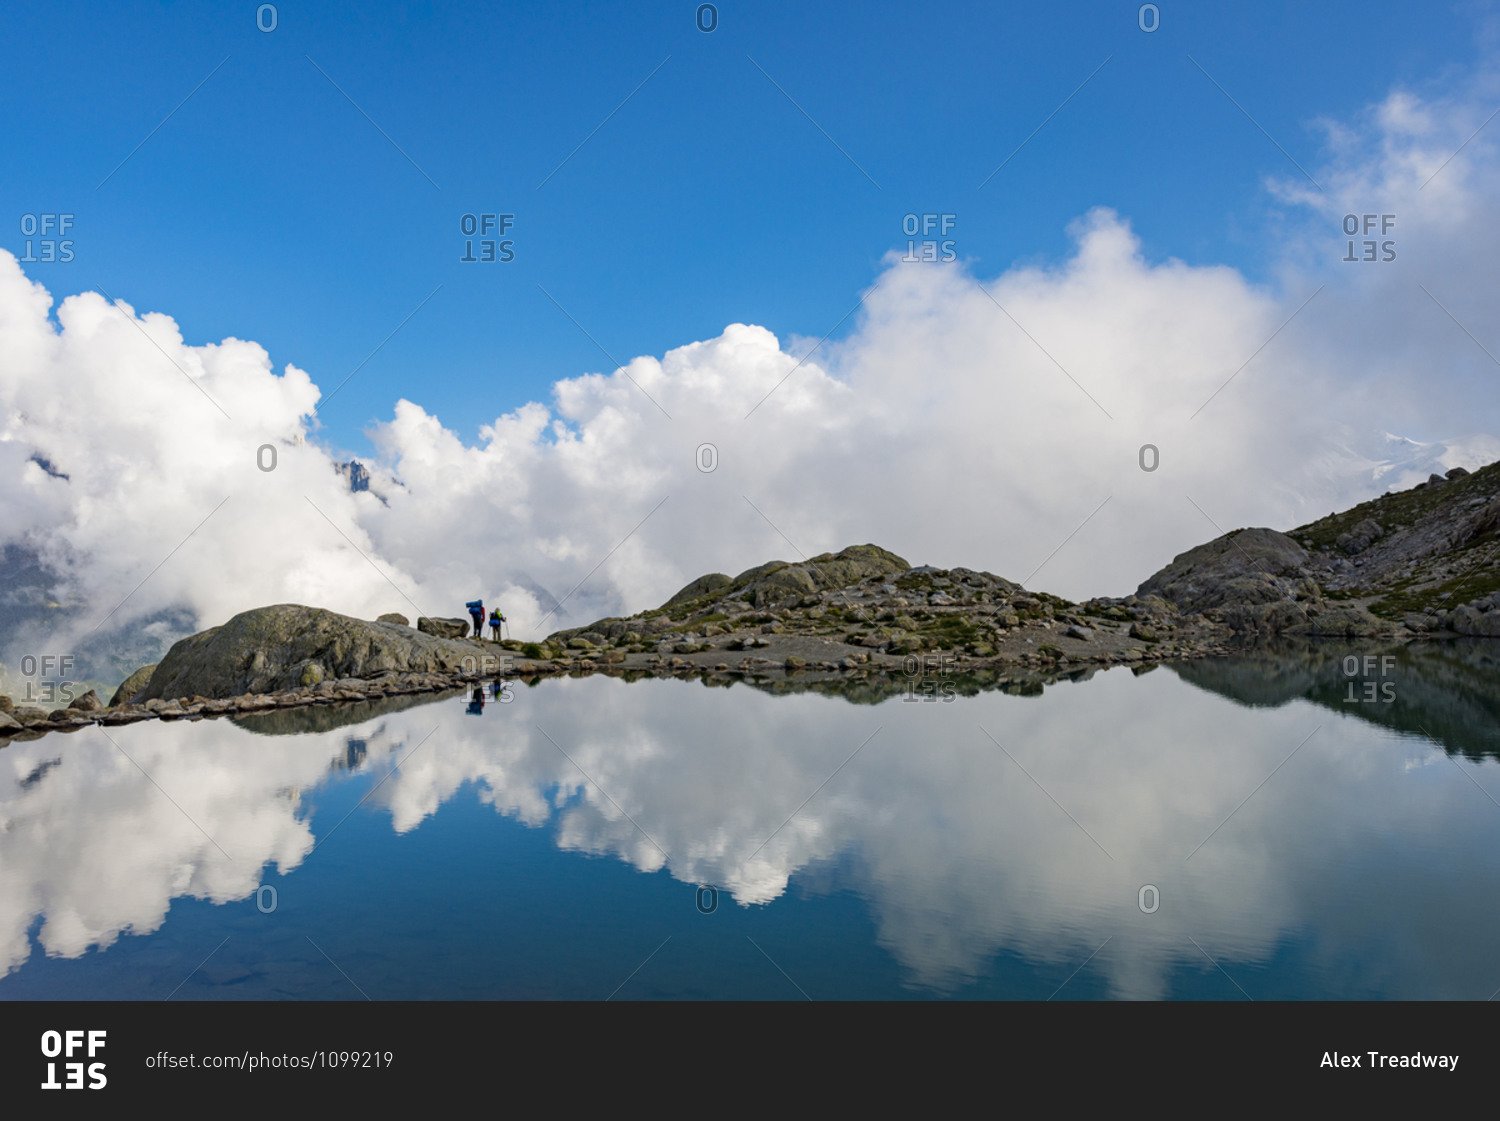 Hikers reflected in Lac Blanc on the Tour du Mont Blanc trekking route in the French Alps